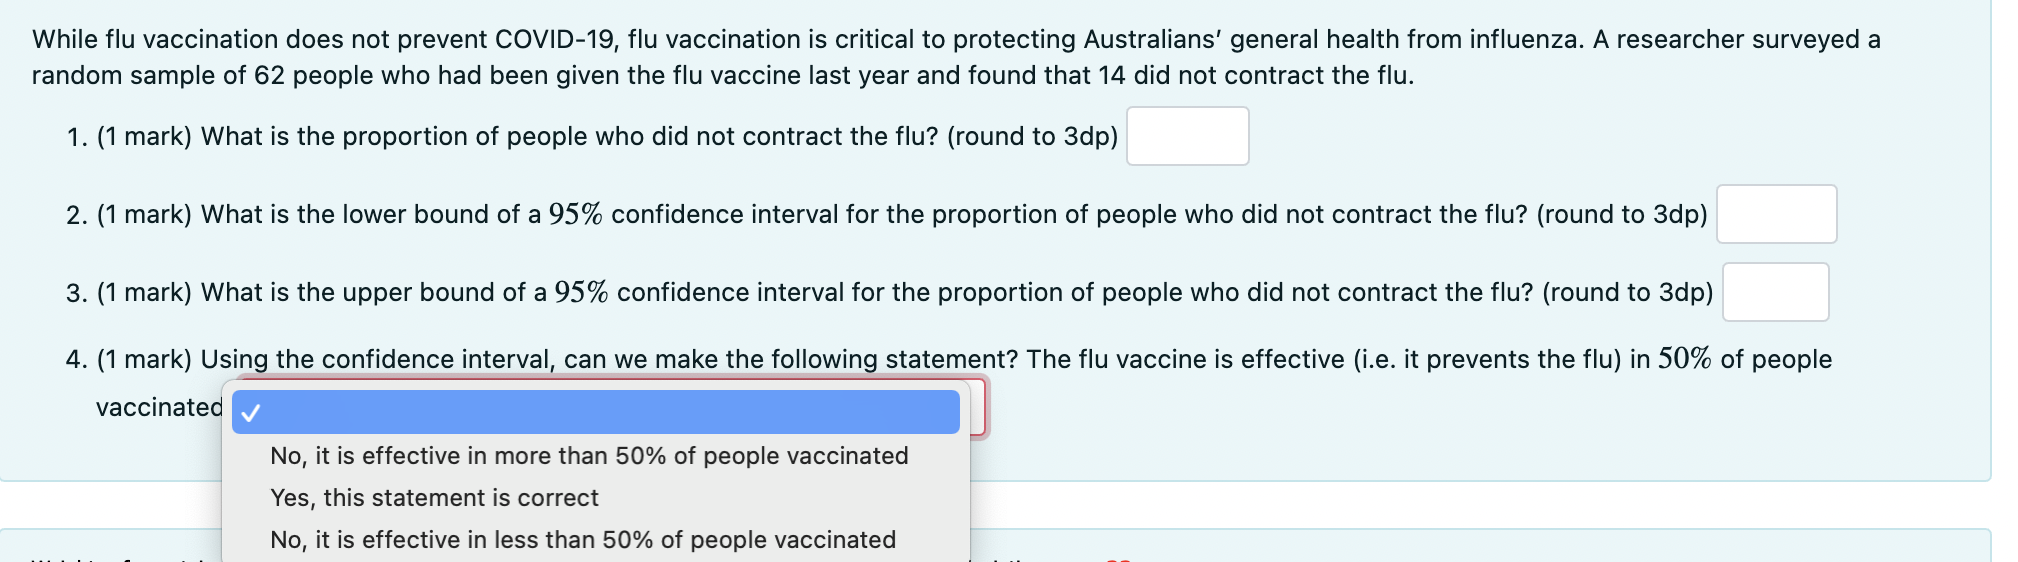 While Flu Vaccination Does Not Prevent Covid 19 Flu Vaccination Is Critical To Protecting Australians General Health F 1